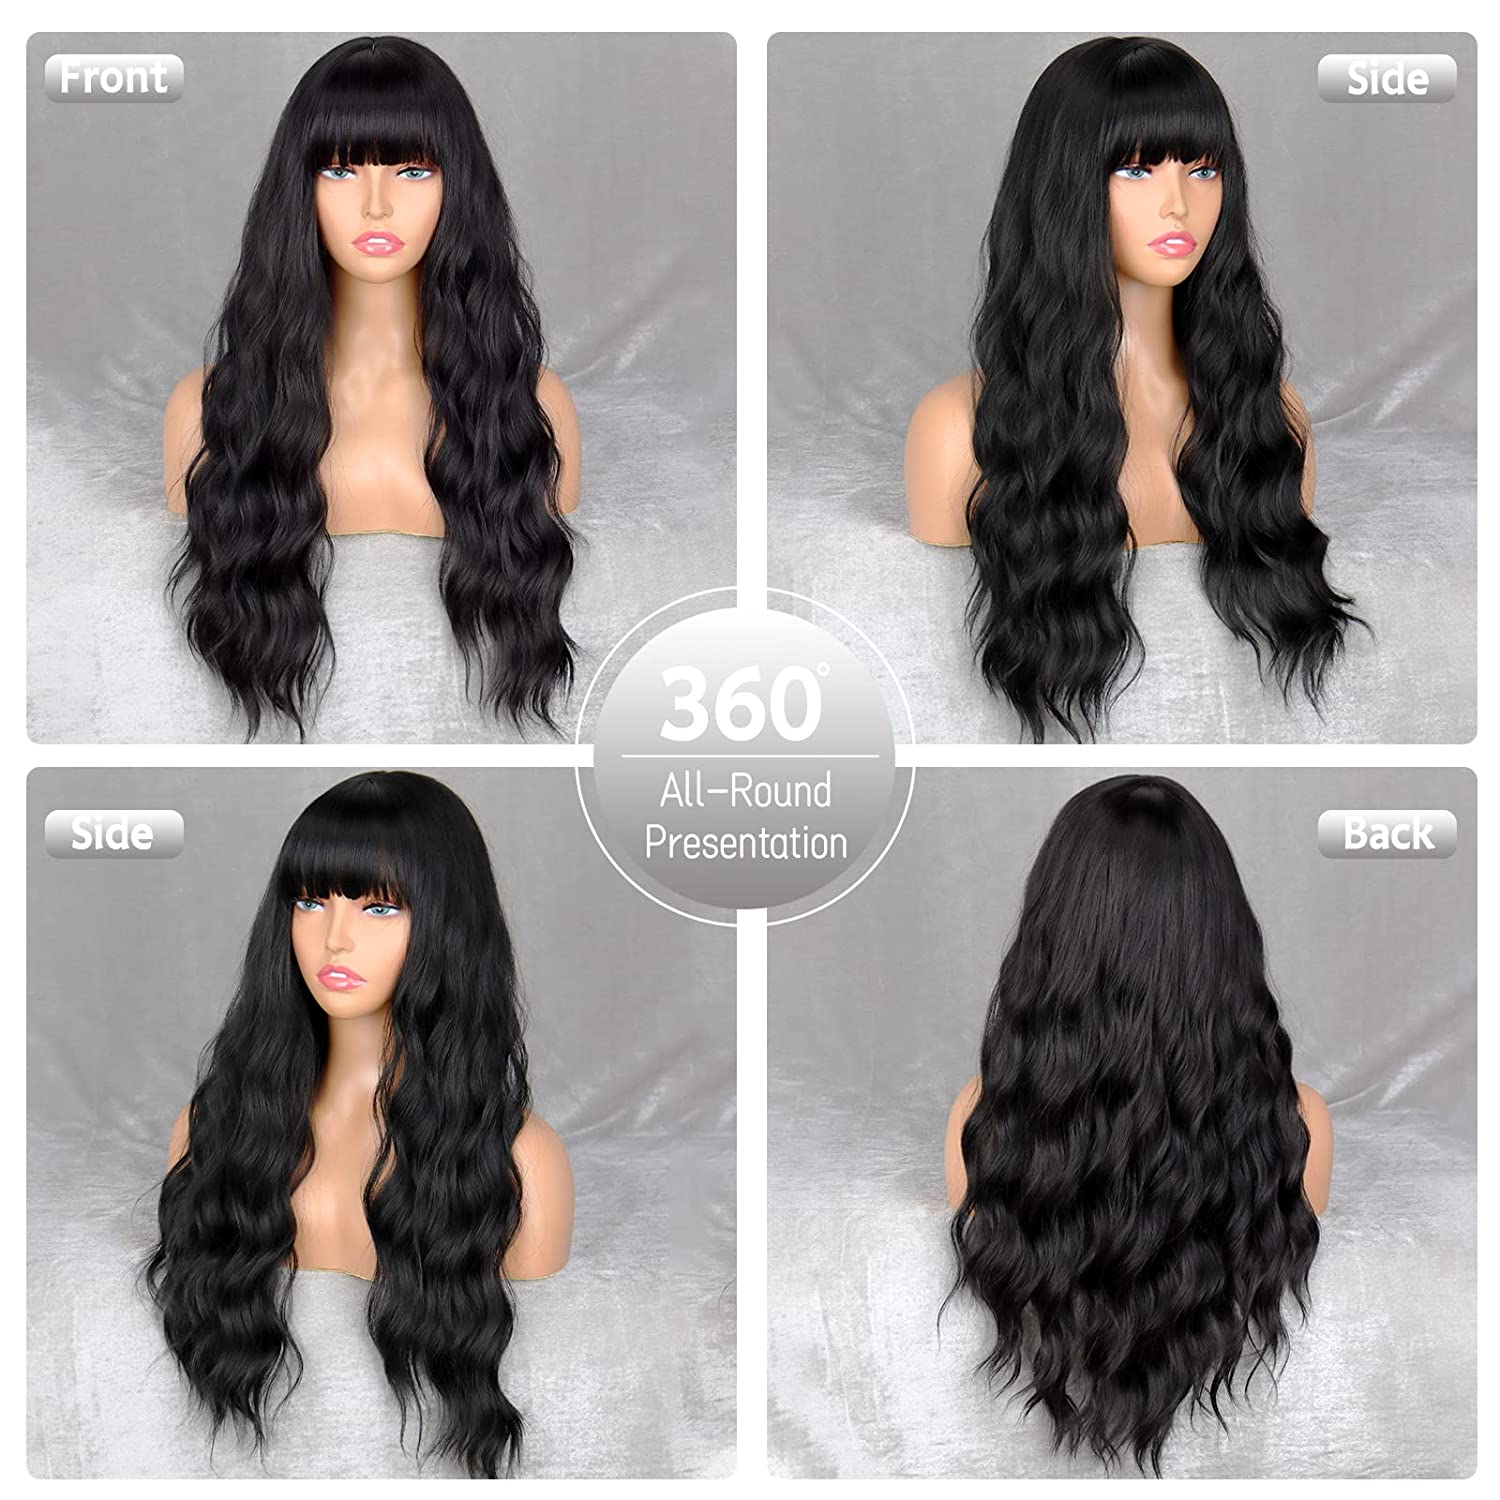 ong Black Wig with Bangs,Synthetic Wavy Bang Black Wigs for Women, Women Long Curly Heat Resistant Black Hair Wig